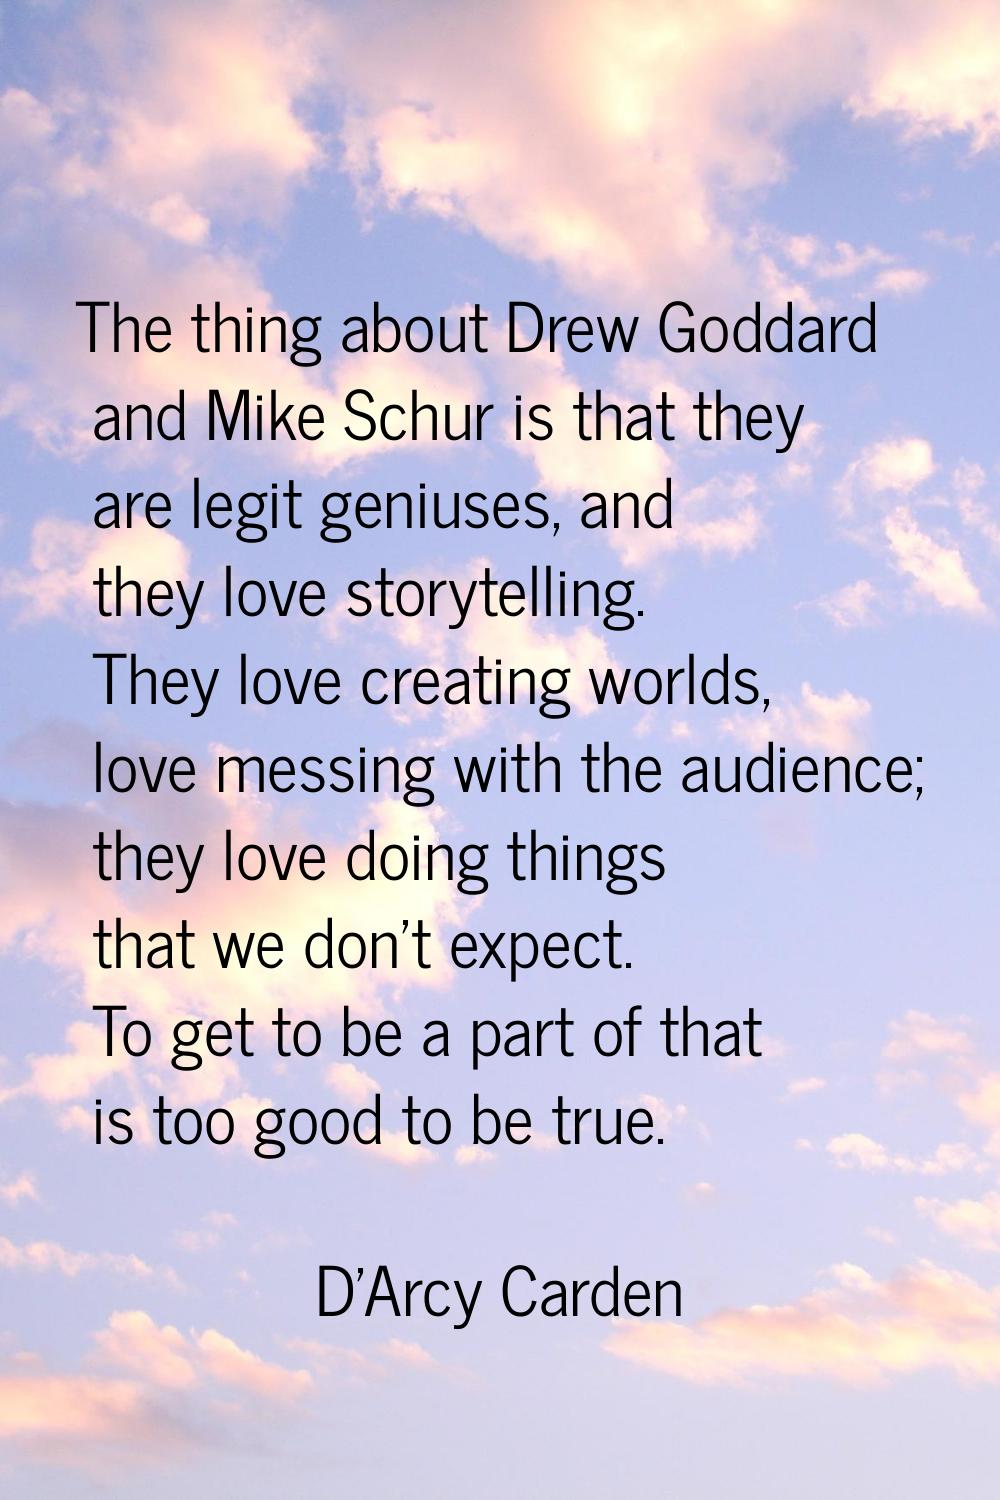 The thing about Drew Goddard and Mike Schur is that they are legit geniuses, and they love storytel